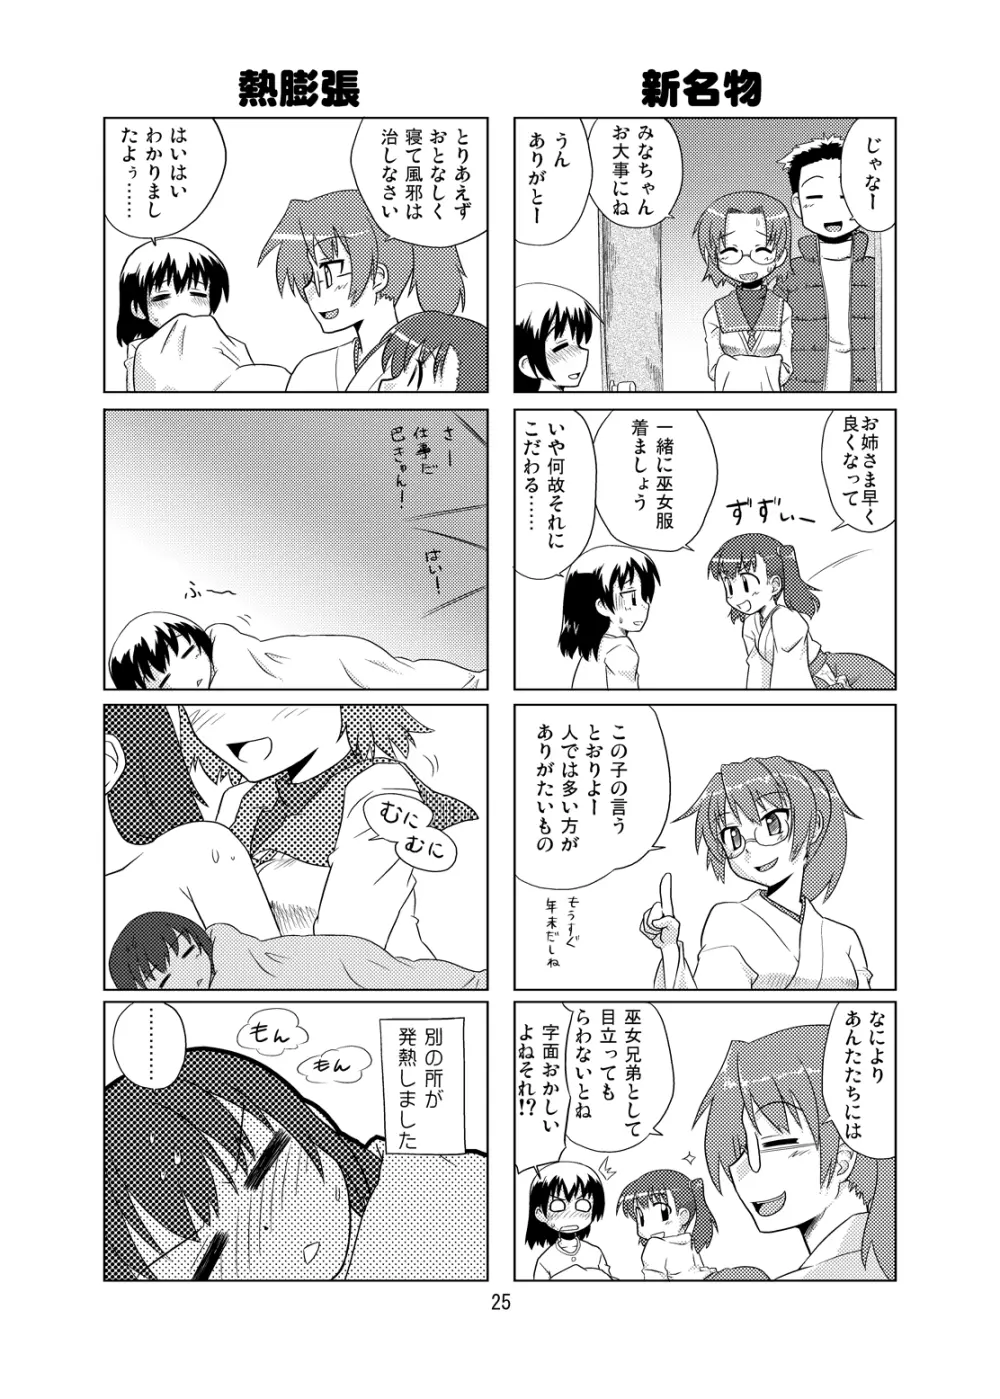 Composition Mix 8 はじマル！6 - page24